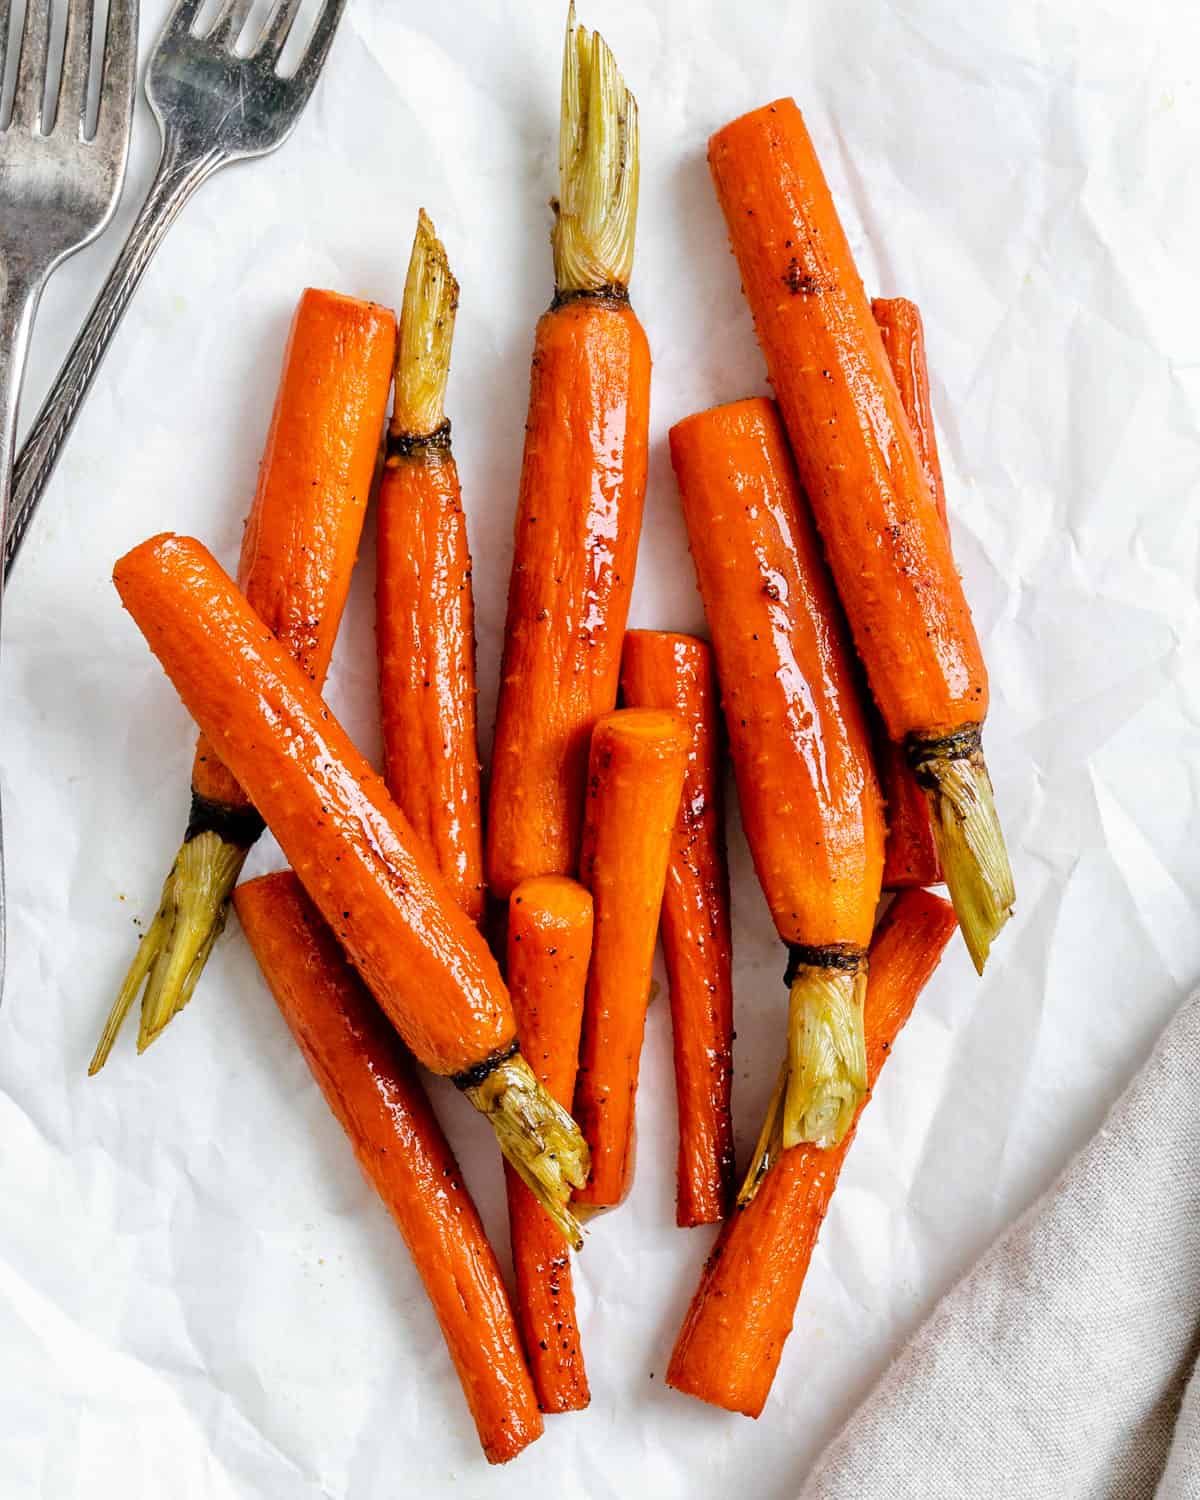 completed glazed carrots against a white surface 